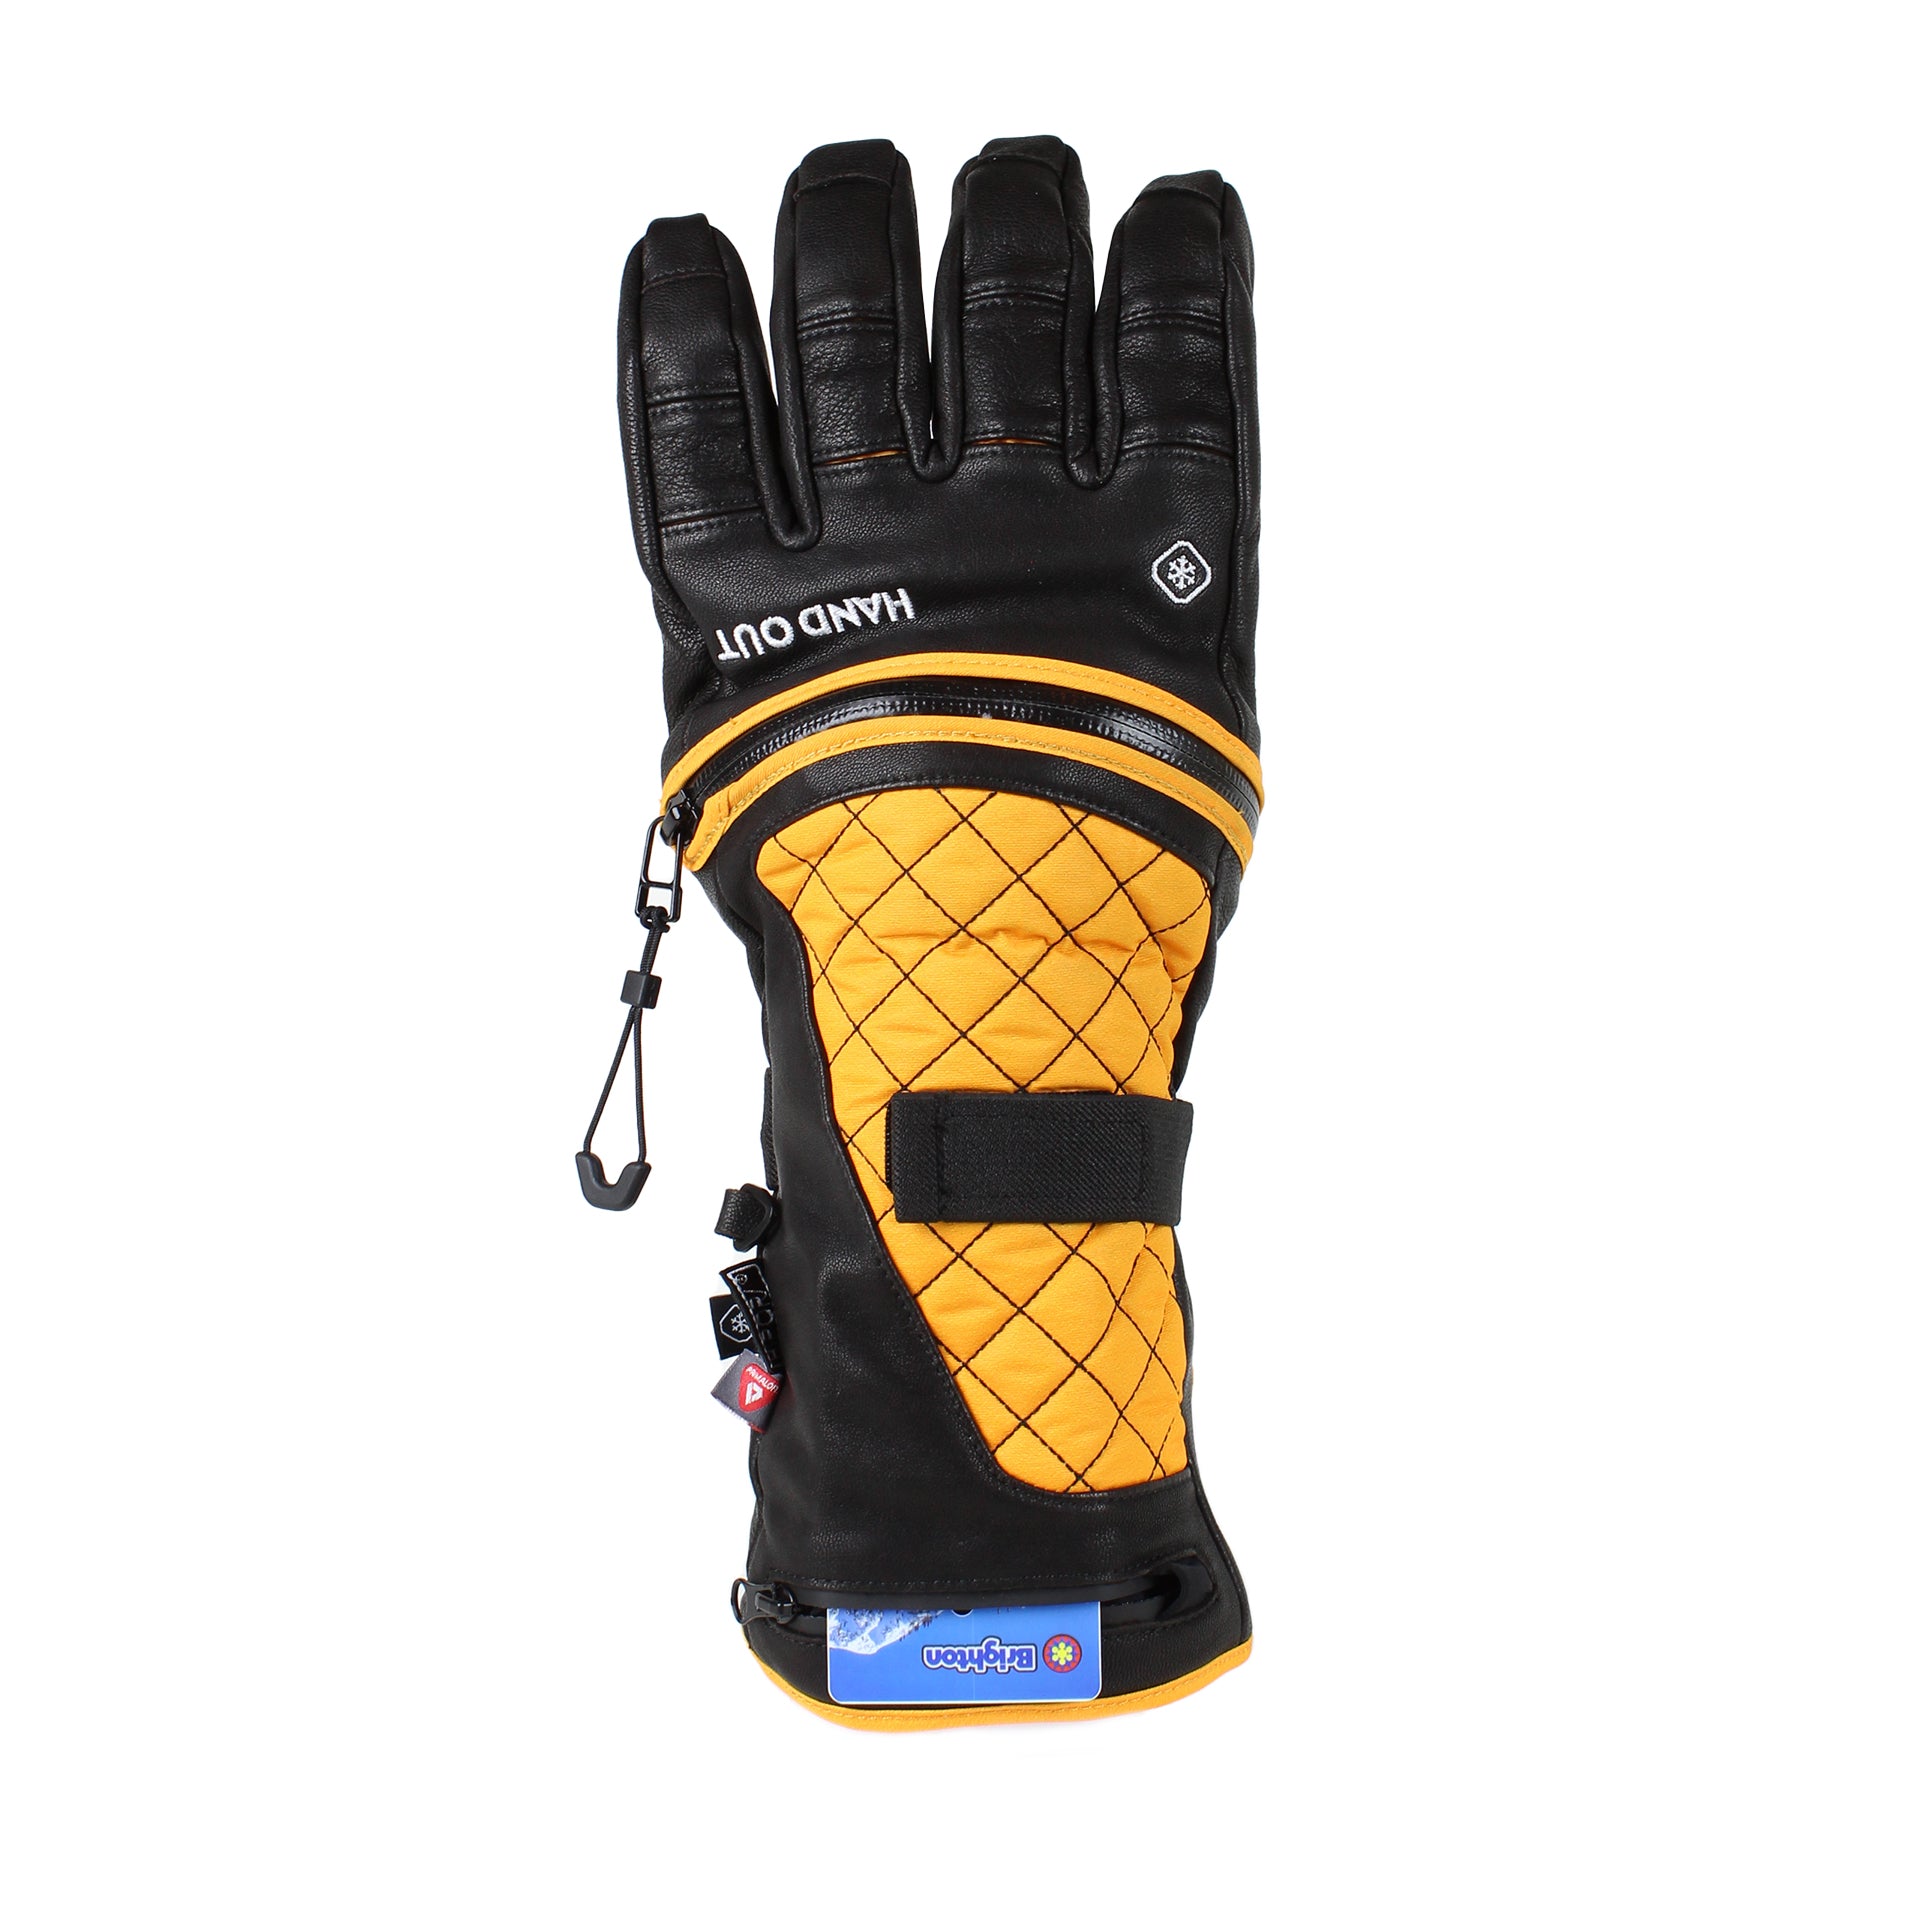 LUX Gloves – Hand Out Gloves